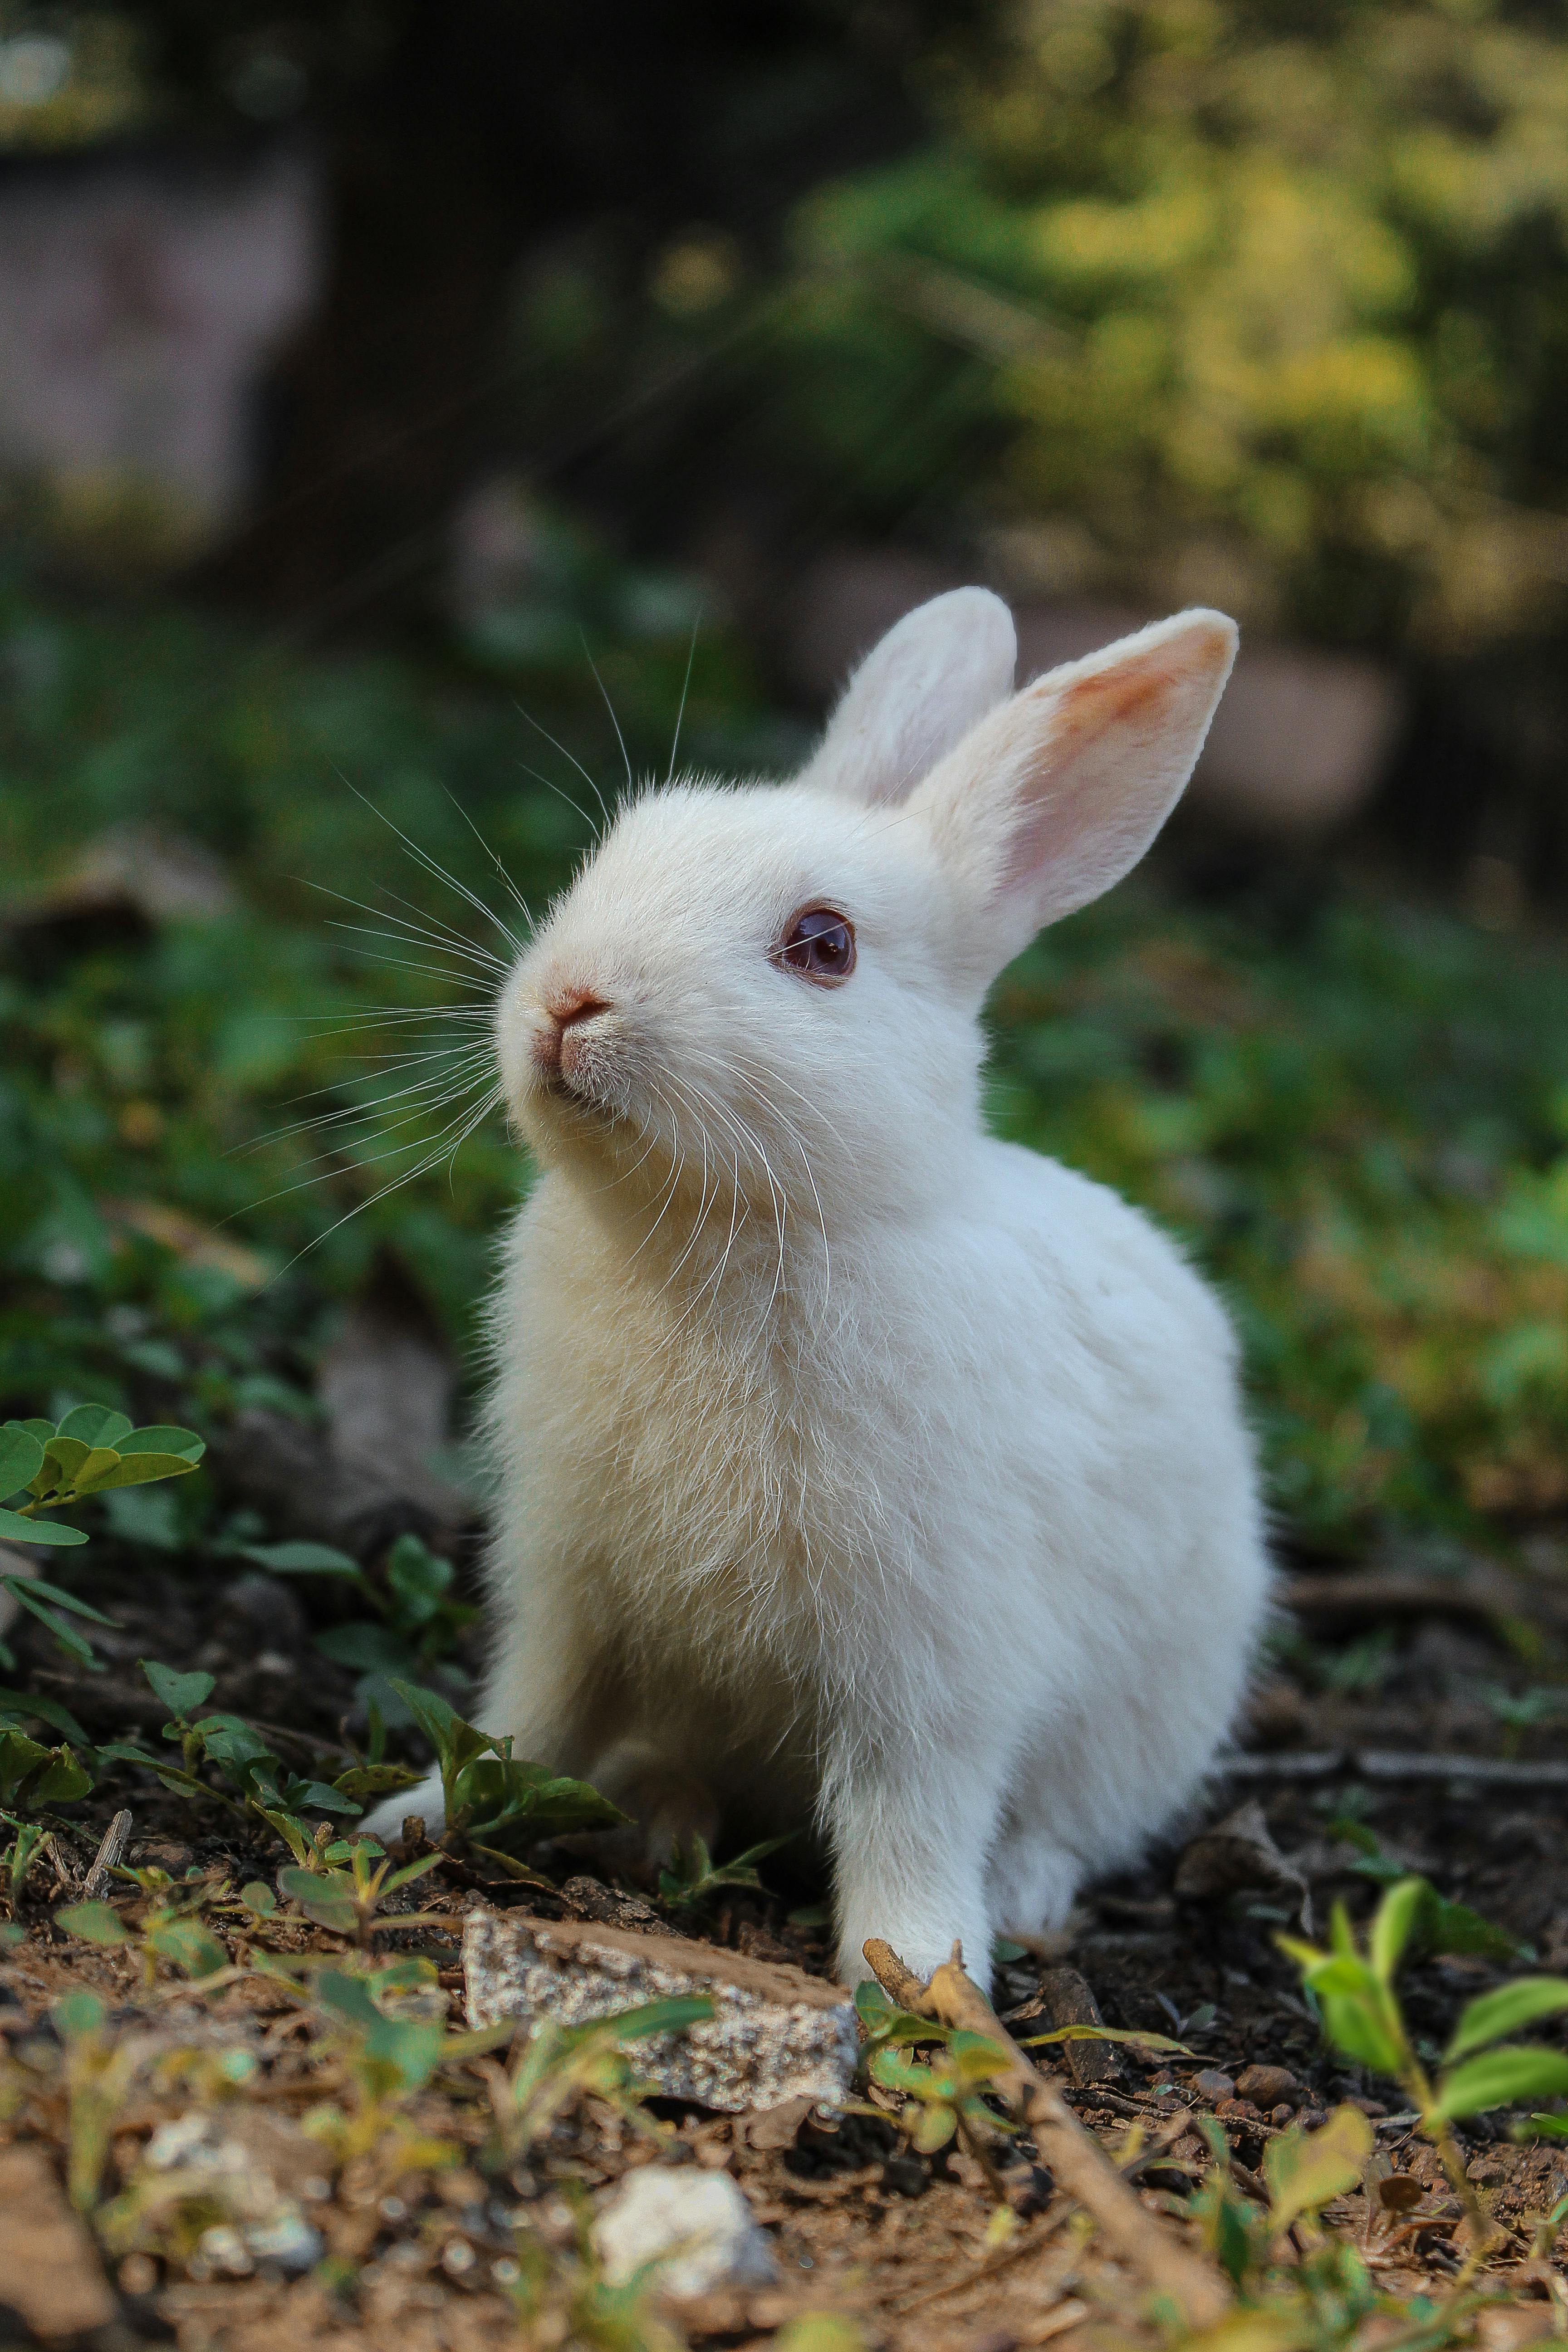 White rabbit Images - Search Images on Everypixel